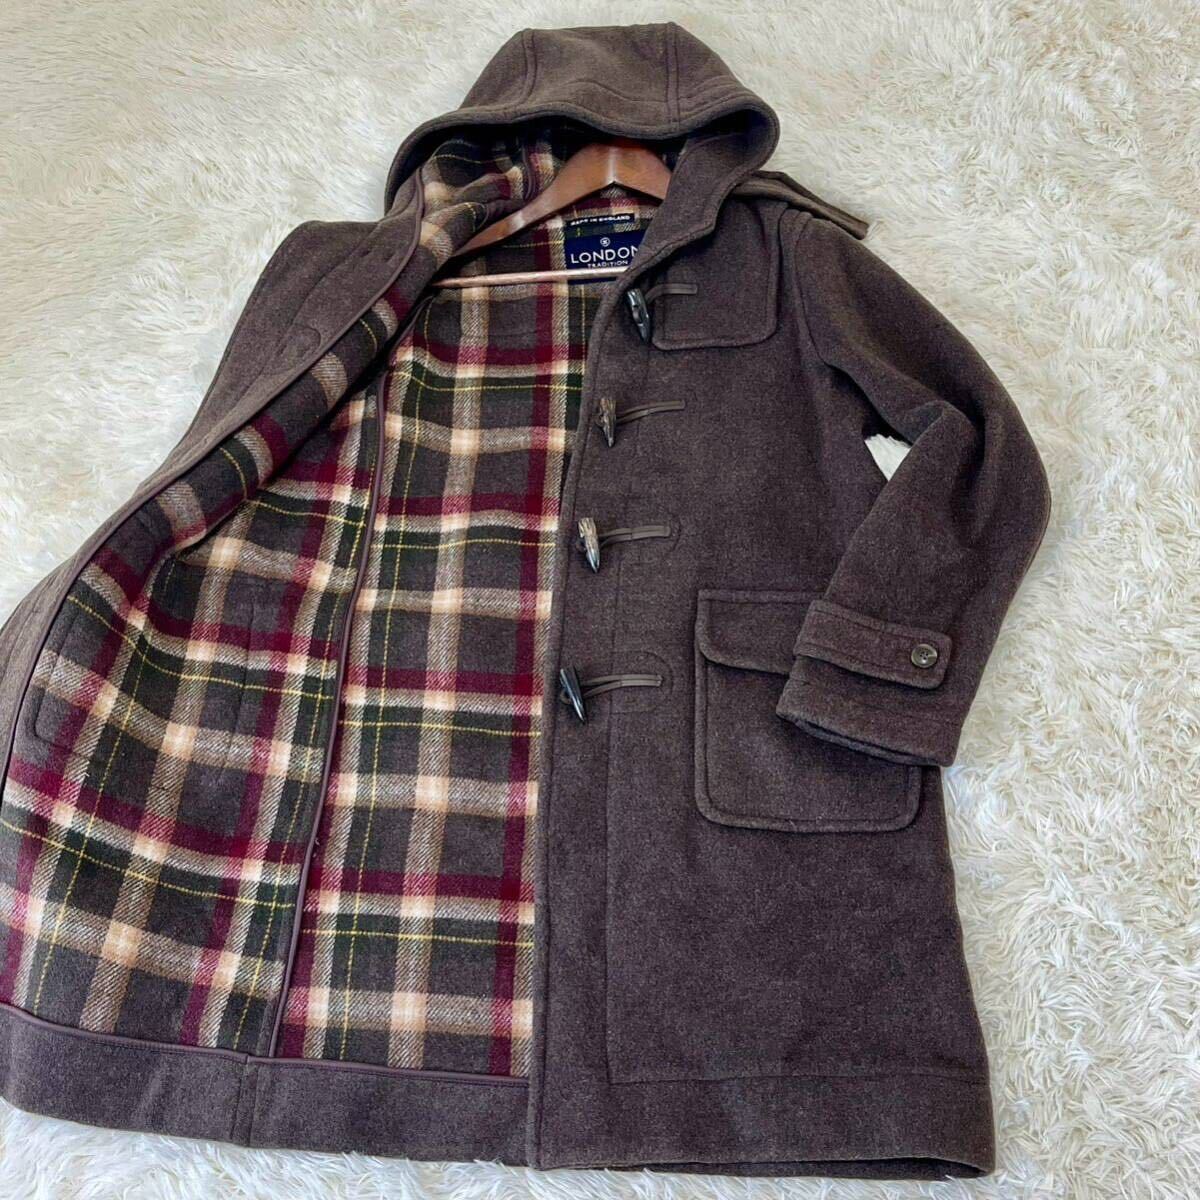  rare L size London tiger tishon[ adult color .] LONDON TRADITION duffle coat toggle wool lining check outer Britain made 40